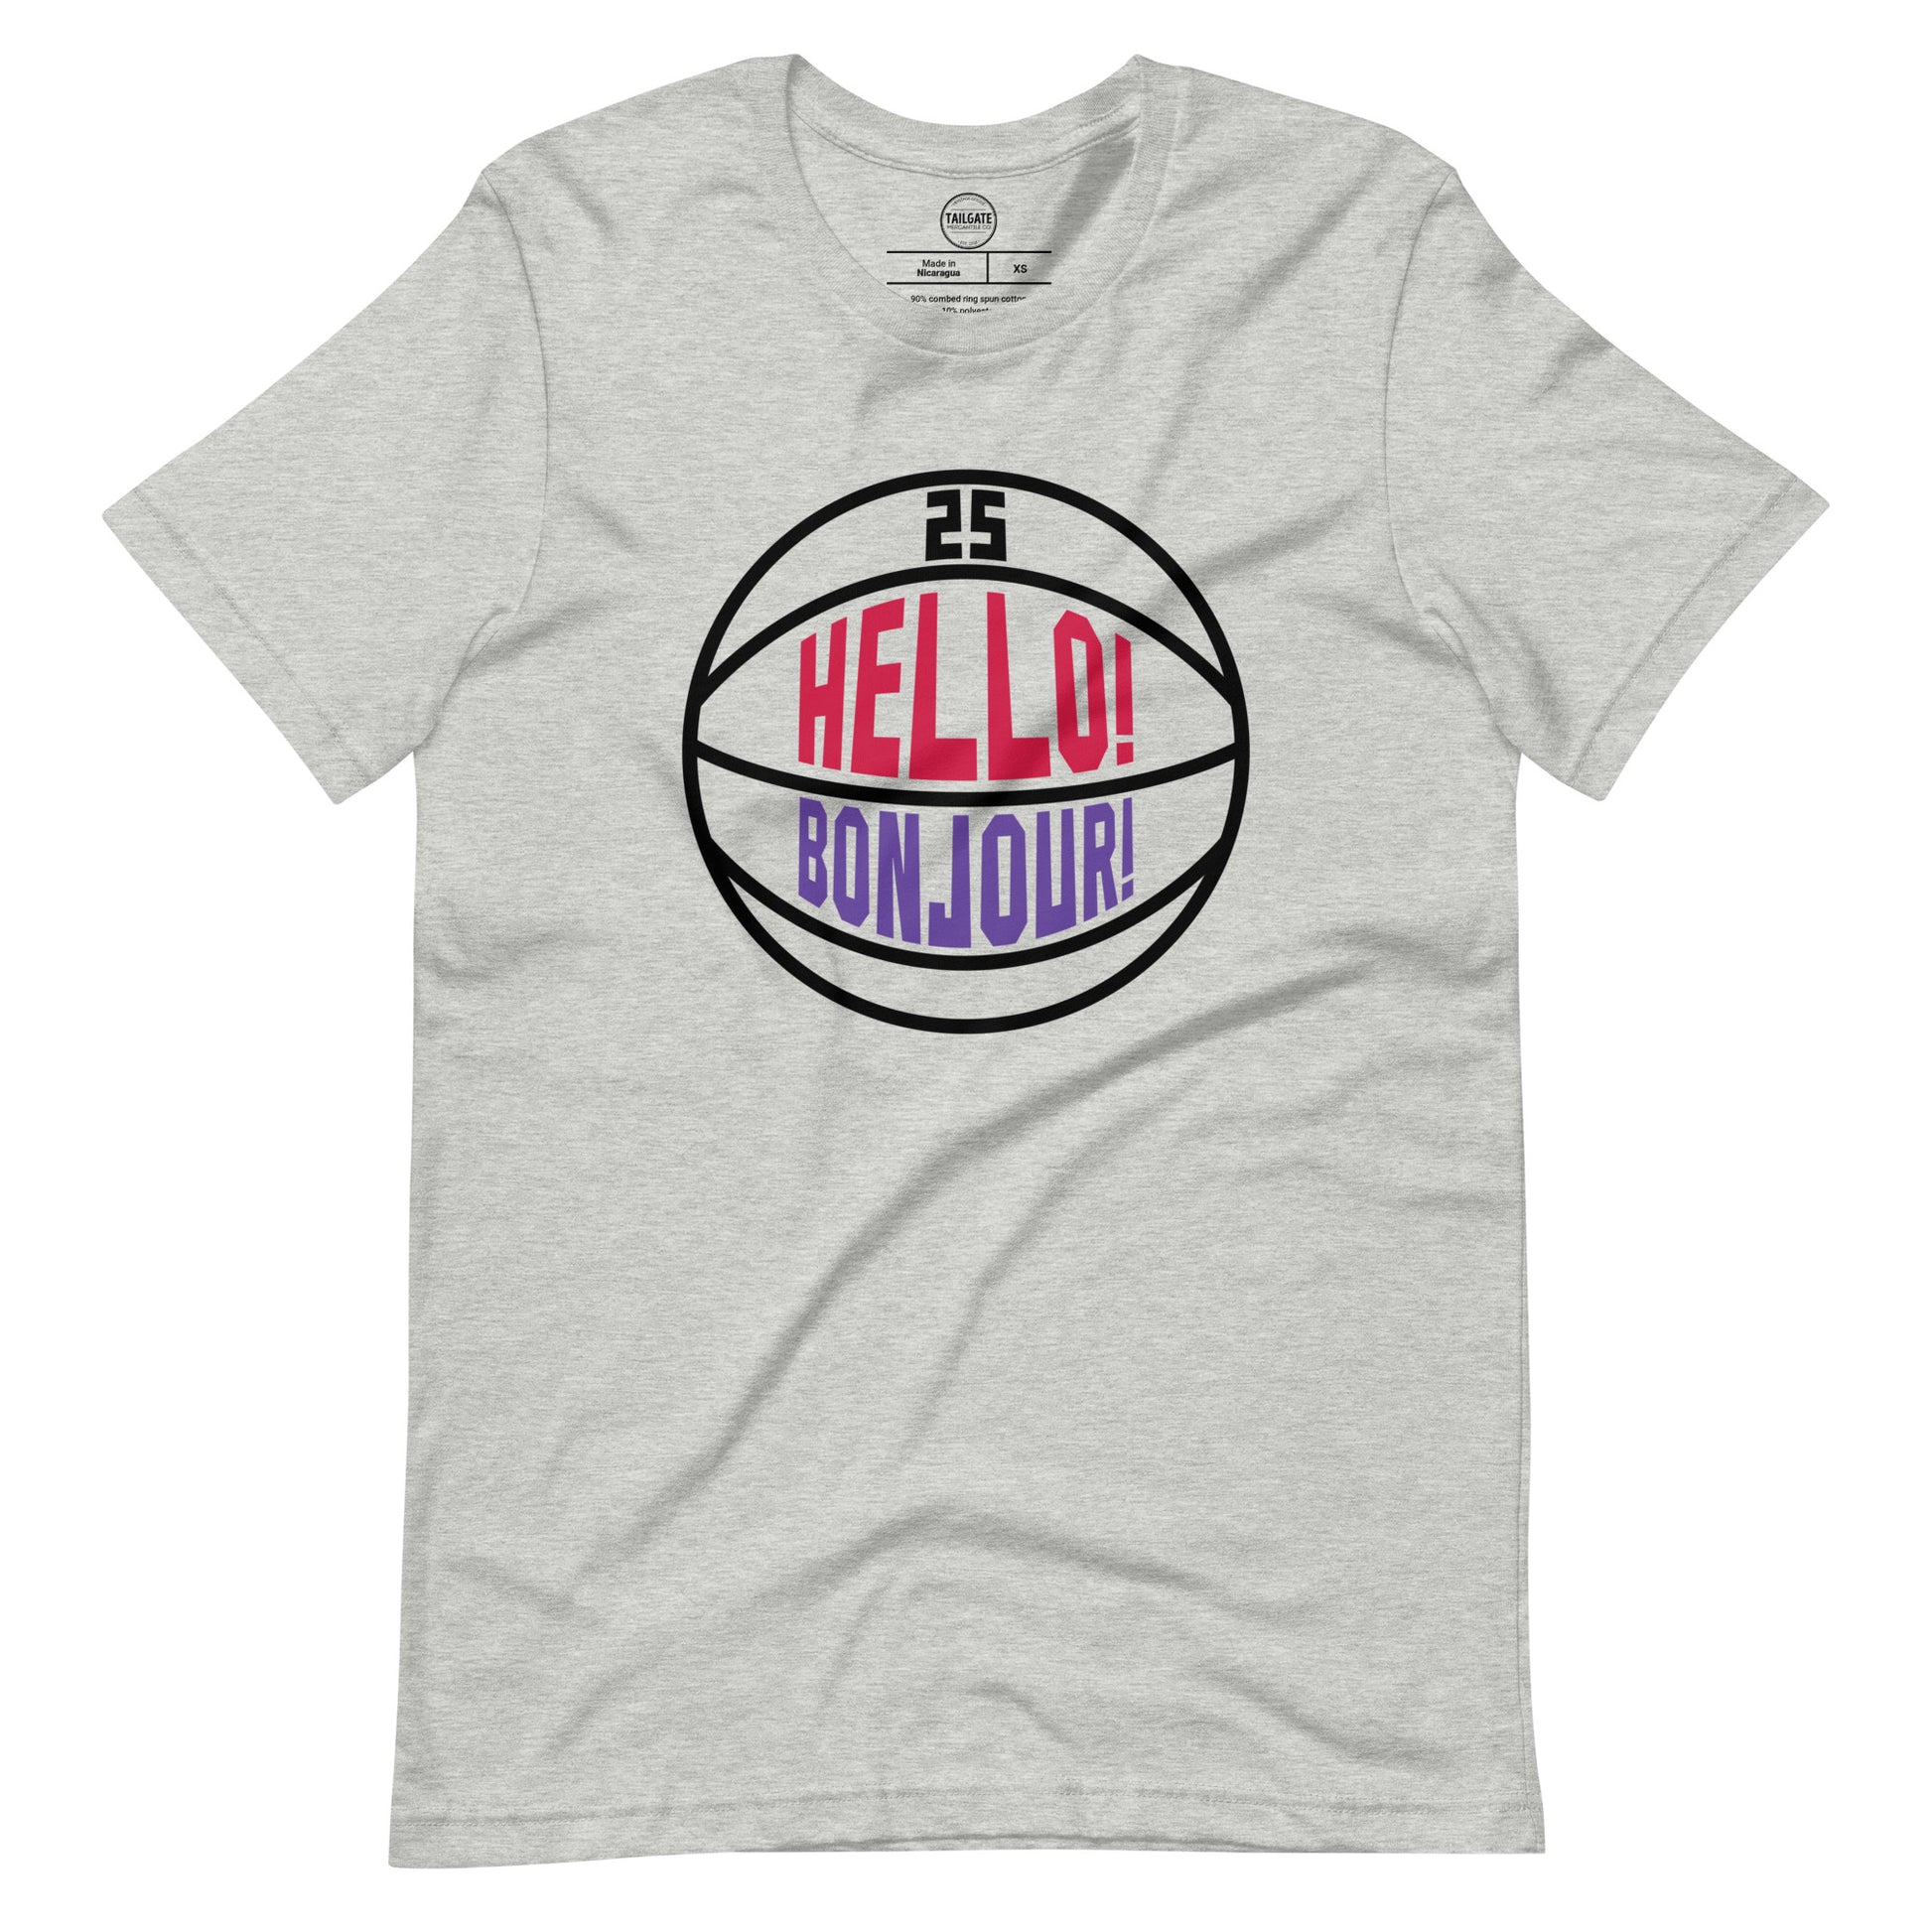 This image details the graphic design "Hello! Bonjour!". In the image, the words are built into a basketball and feature Chris Boucher's number 25. The Toronto Raptors' announcer, Jack Armstrong, loves to shout out Hello! Bonjour! when Chris Boucher does something exciting on the court. The tee is heather athletic grey and the design is black/red/purple similar to the Toronto Raptors retro colours. This item is exclusive to tailgate mercantile and is available only online.